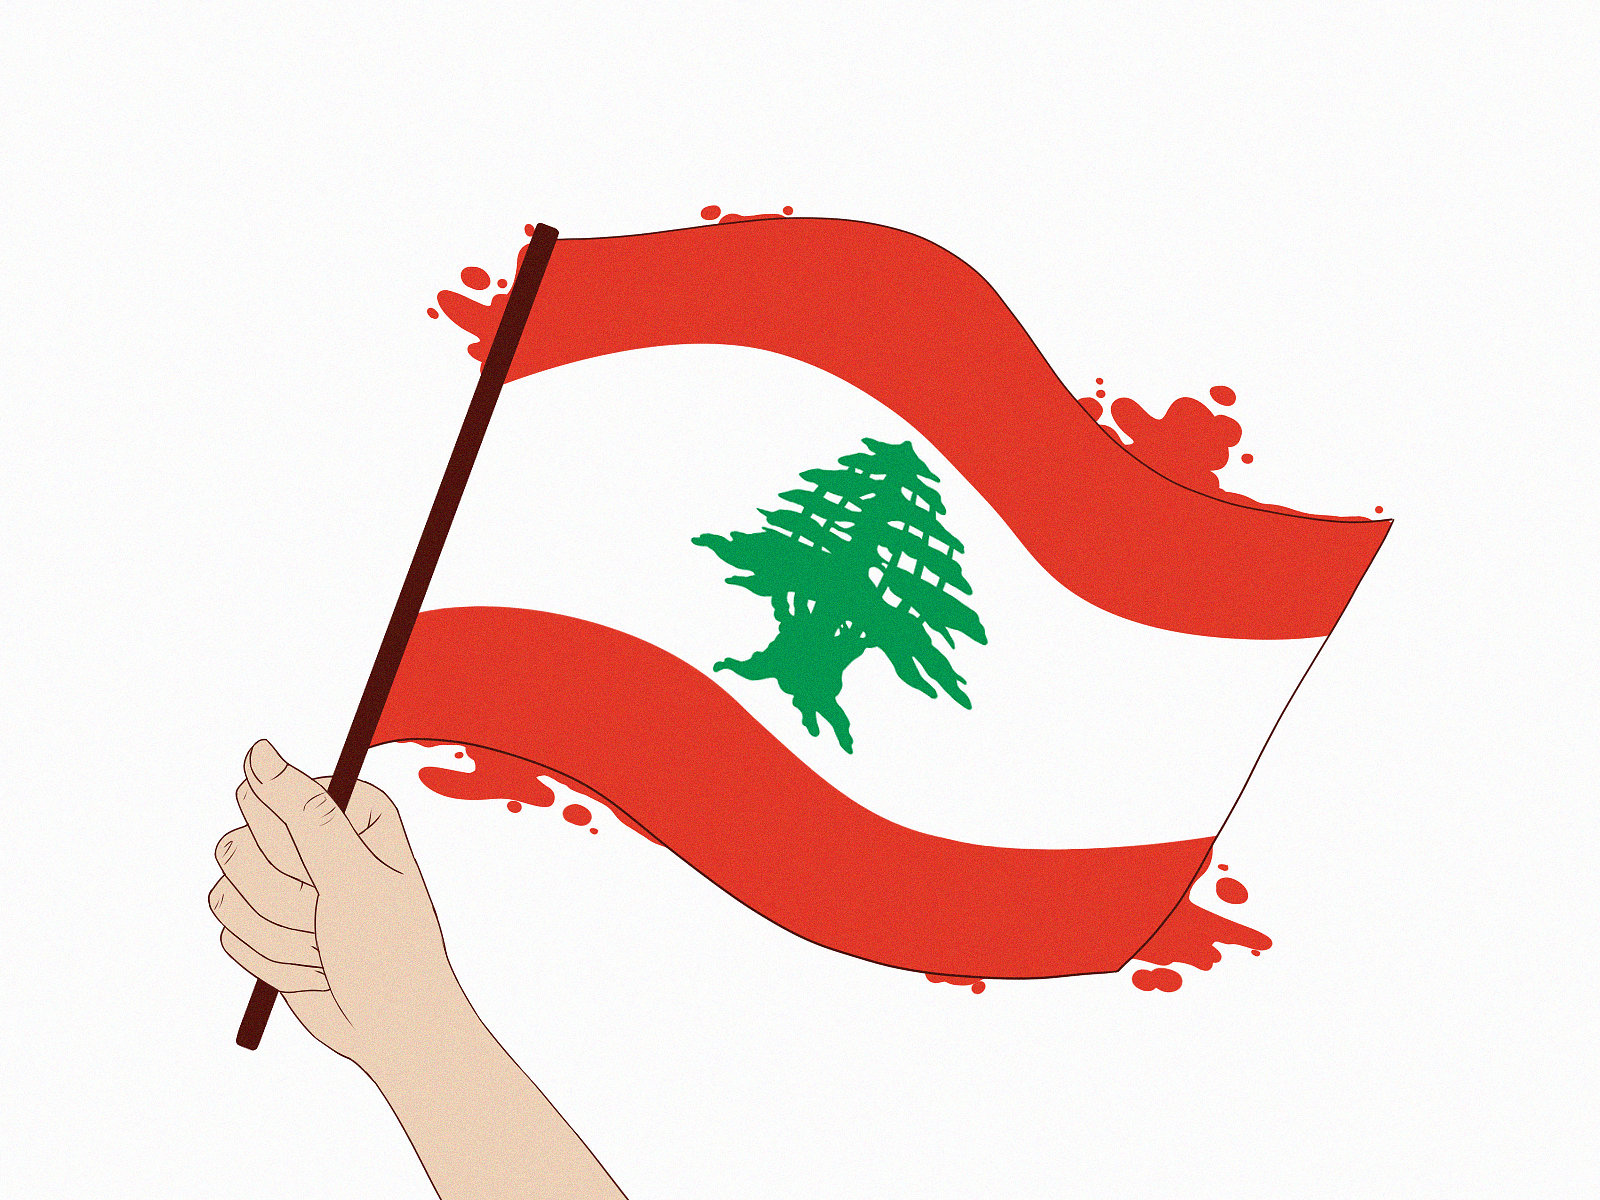 Lebanon is suffering. Here’s how you can help through social media.